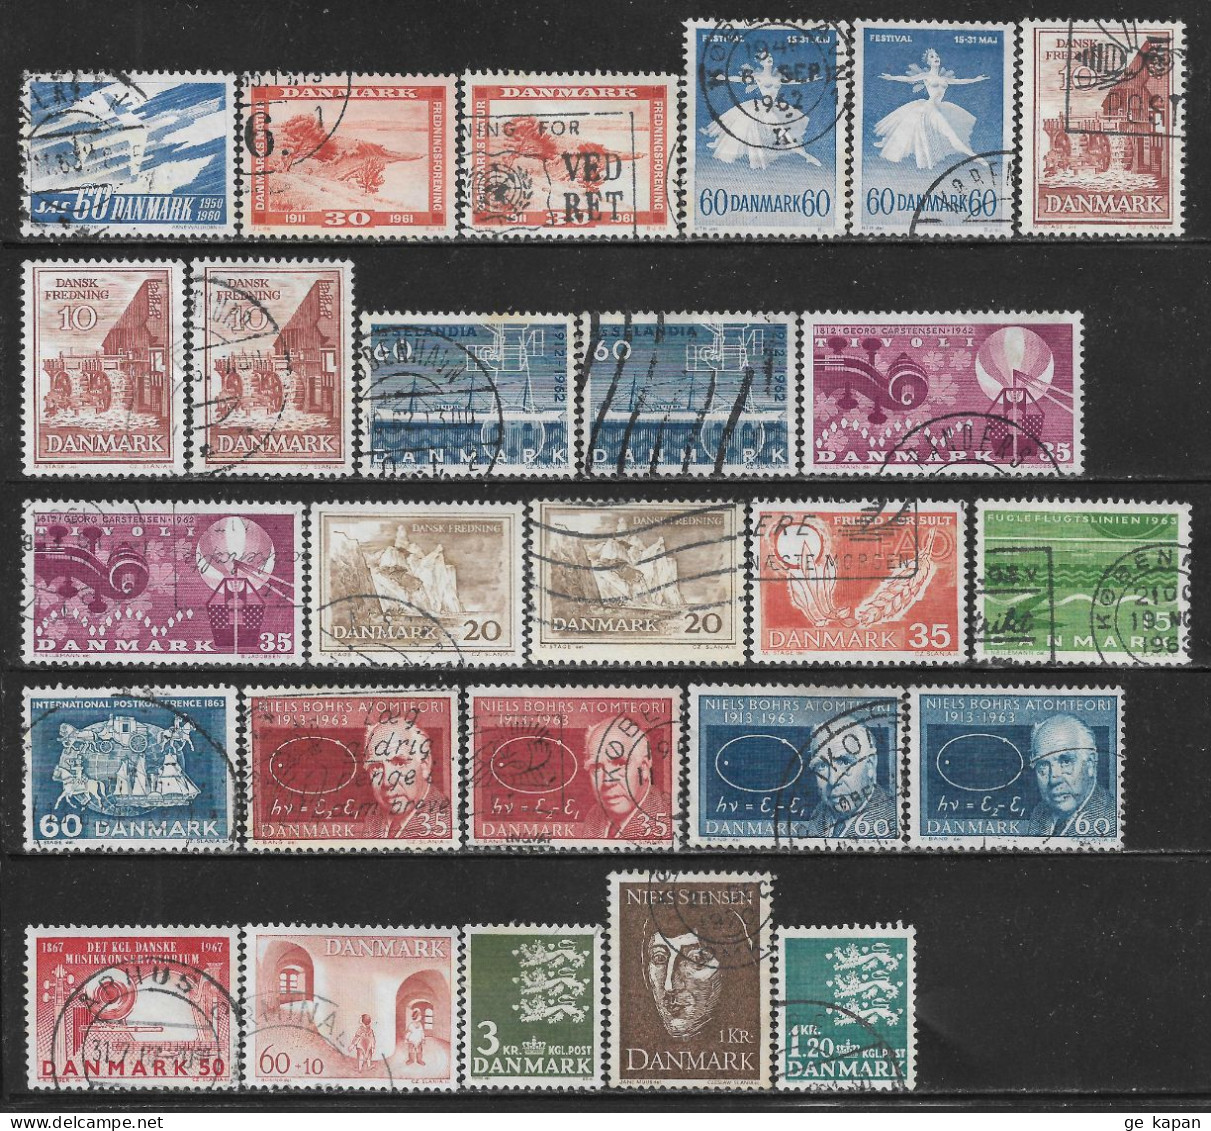 1961-1971 DENMARK Lot Of 26 USED STAMPS (Michel # 388x,389,403,404,406-409,413x,414x,417,418,449,469,483,485,513) €9.10 - Gebraucht